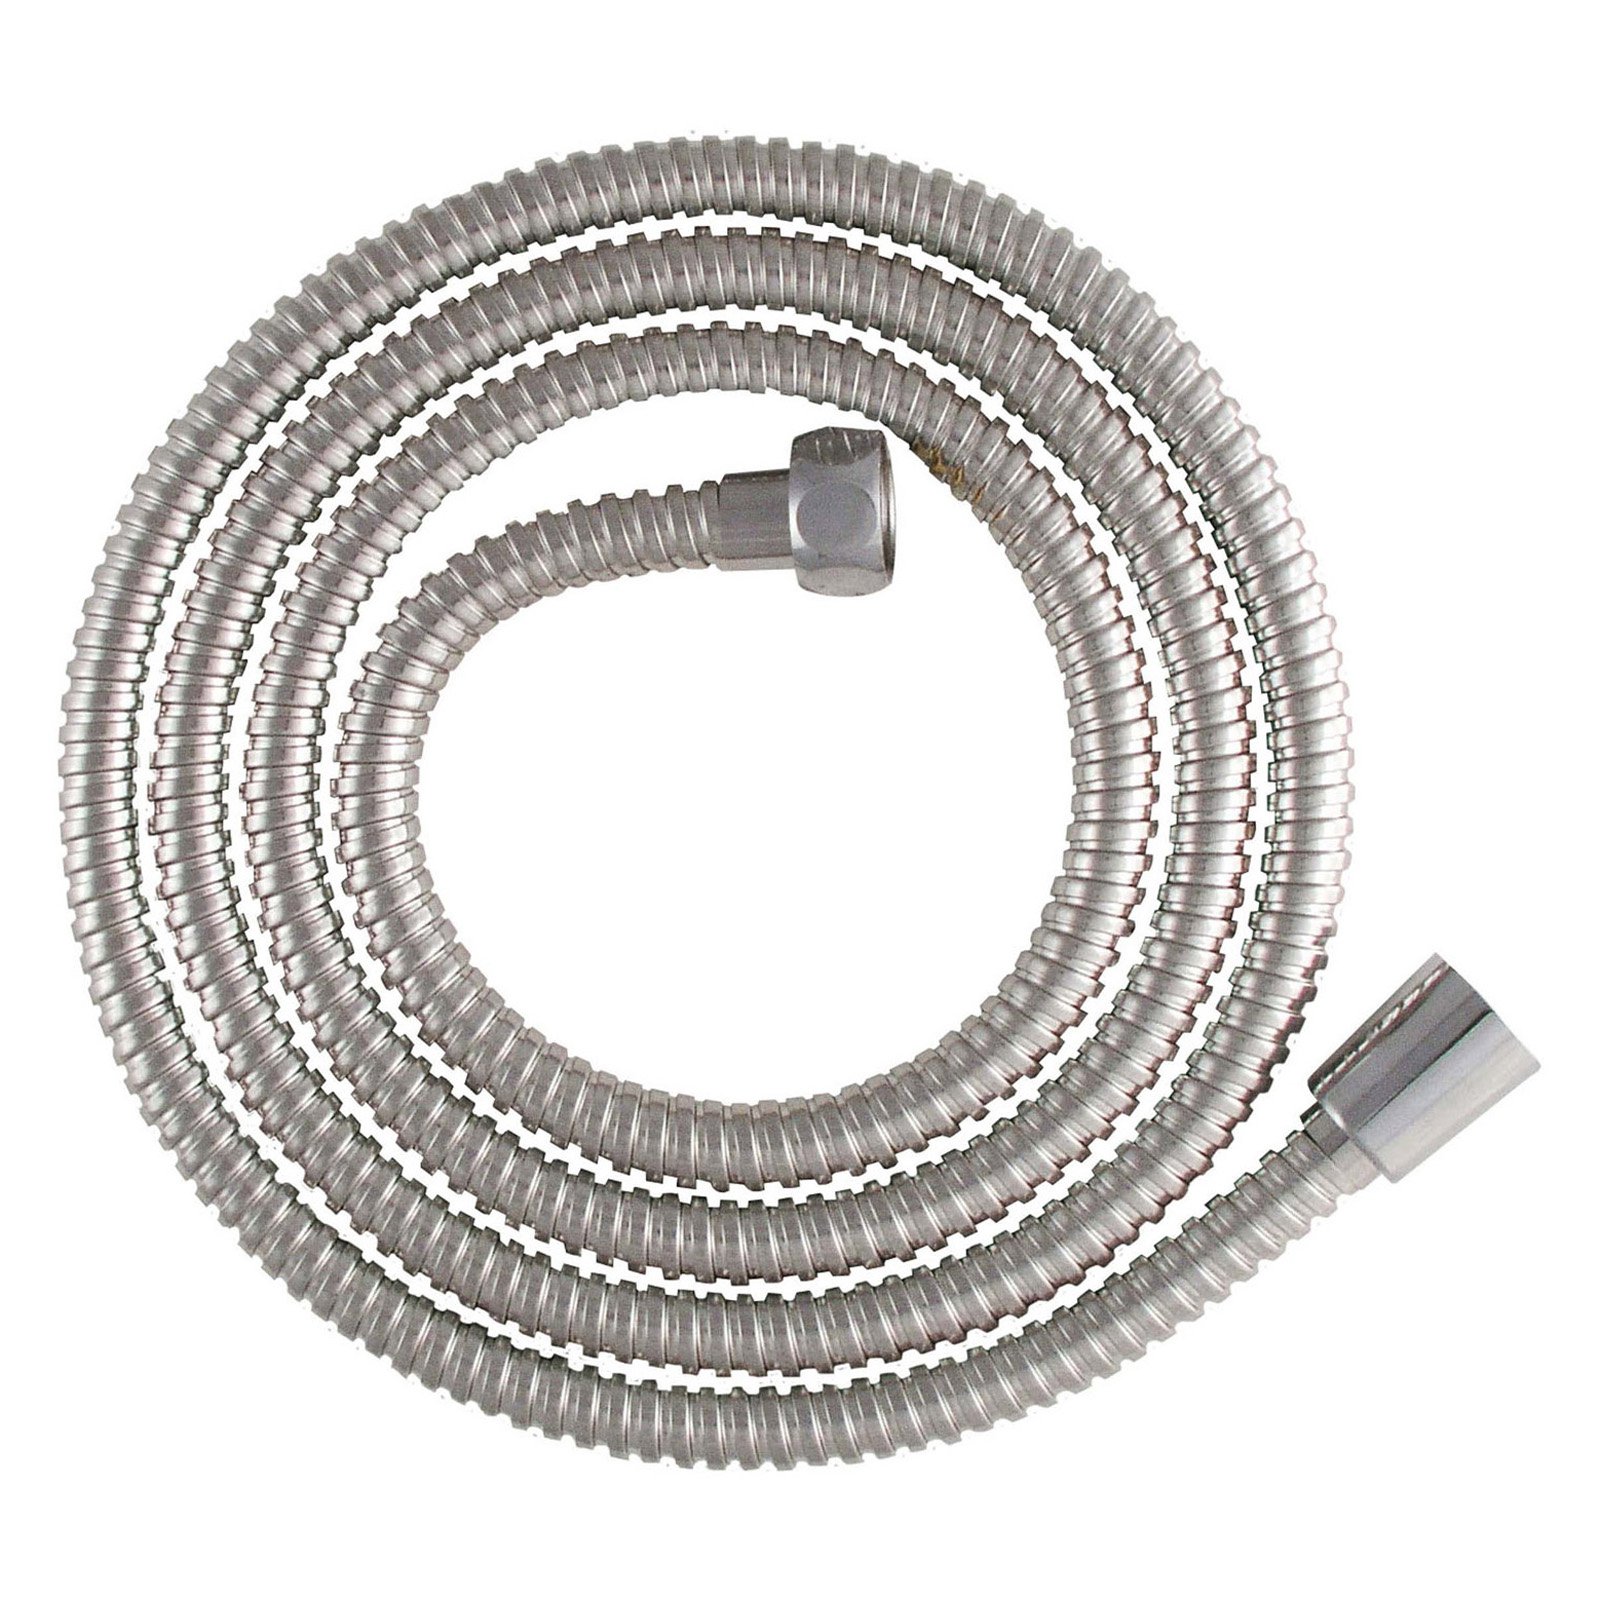 ldr industries 520 2405ss shower hose, 60 x 84", stainless steel - image 1 of 1